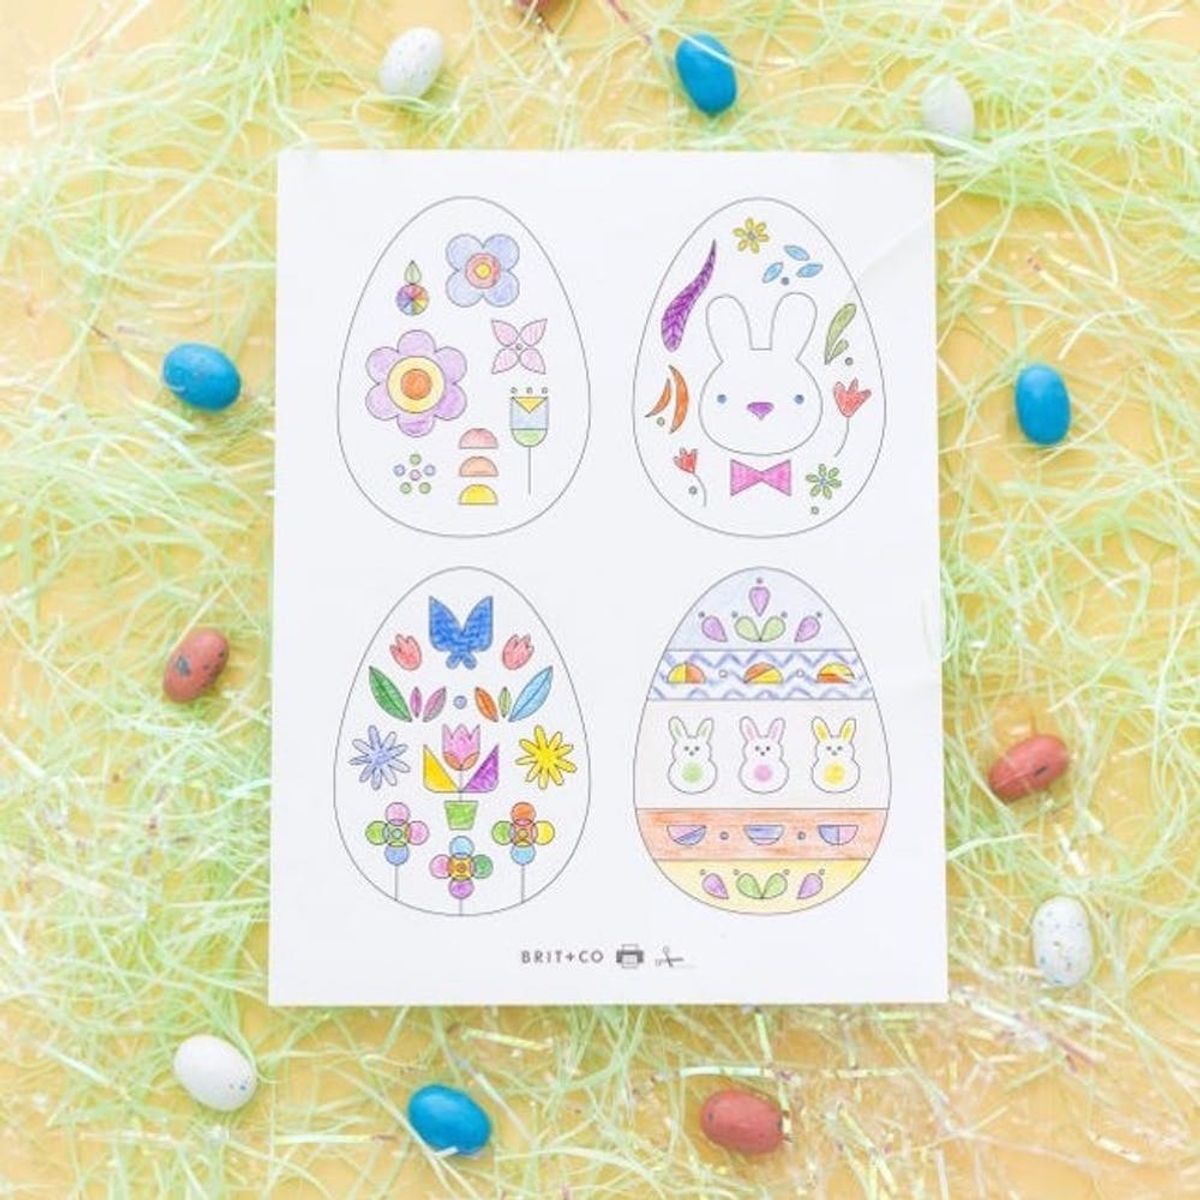 Download These Adorable Passover + Easter Coloring Pages